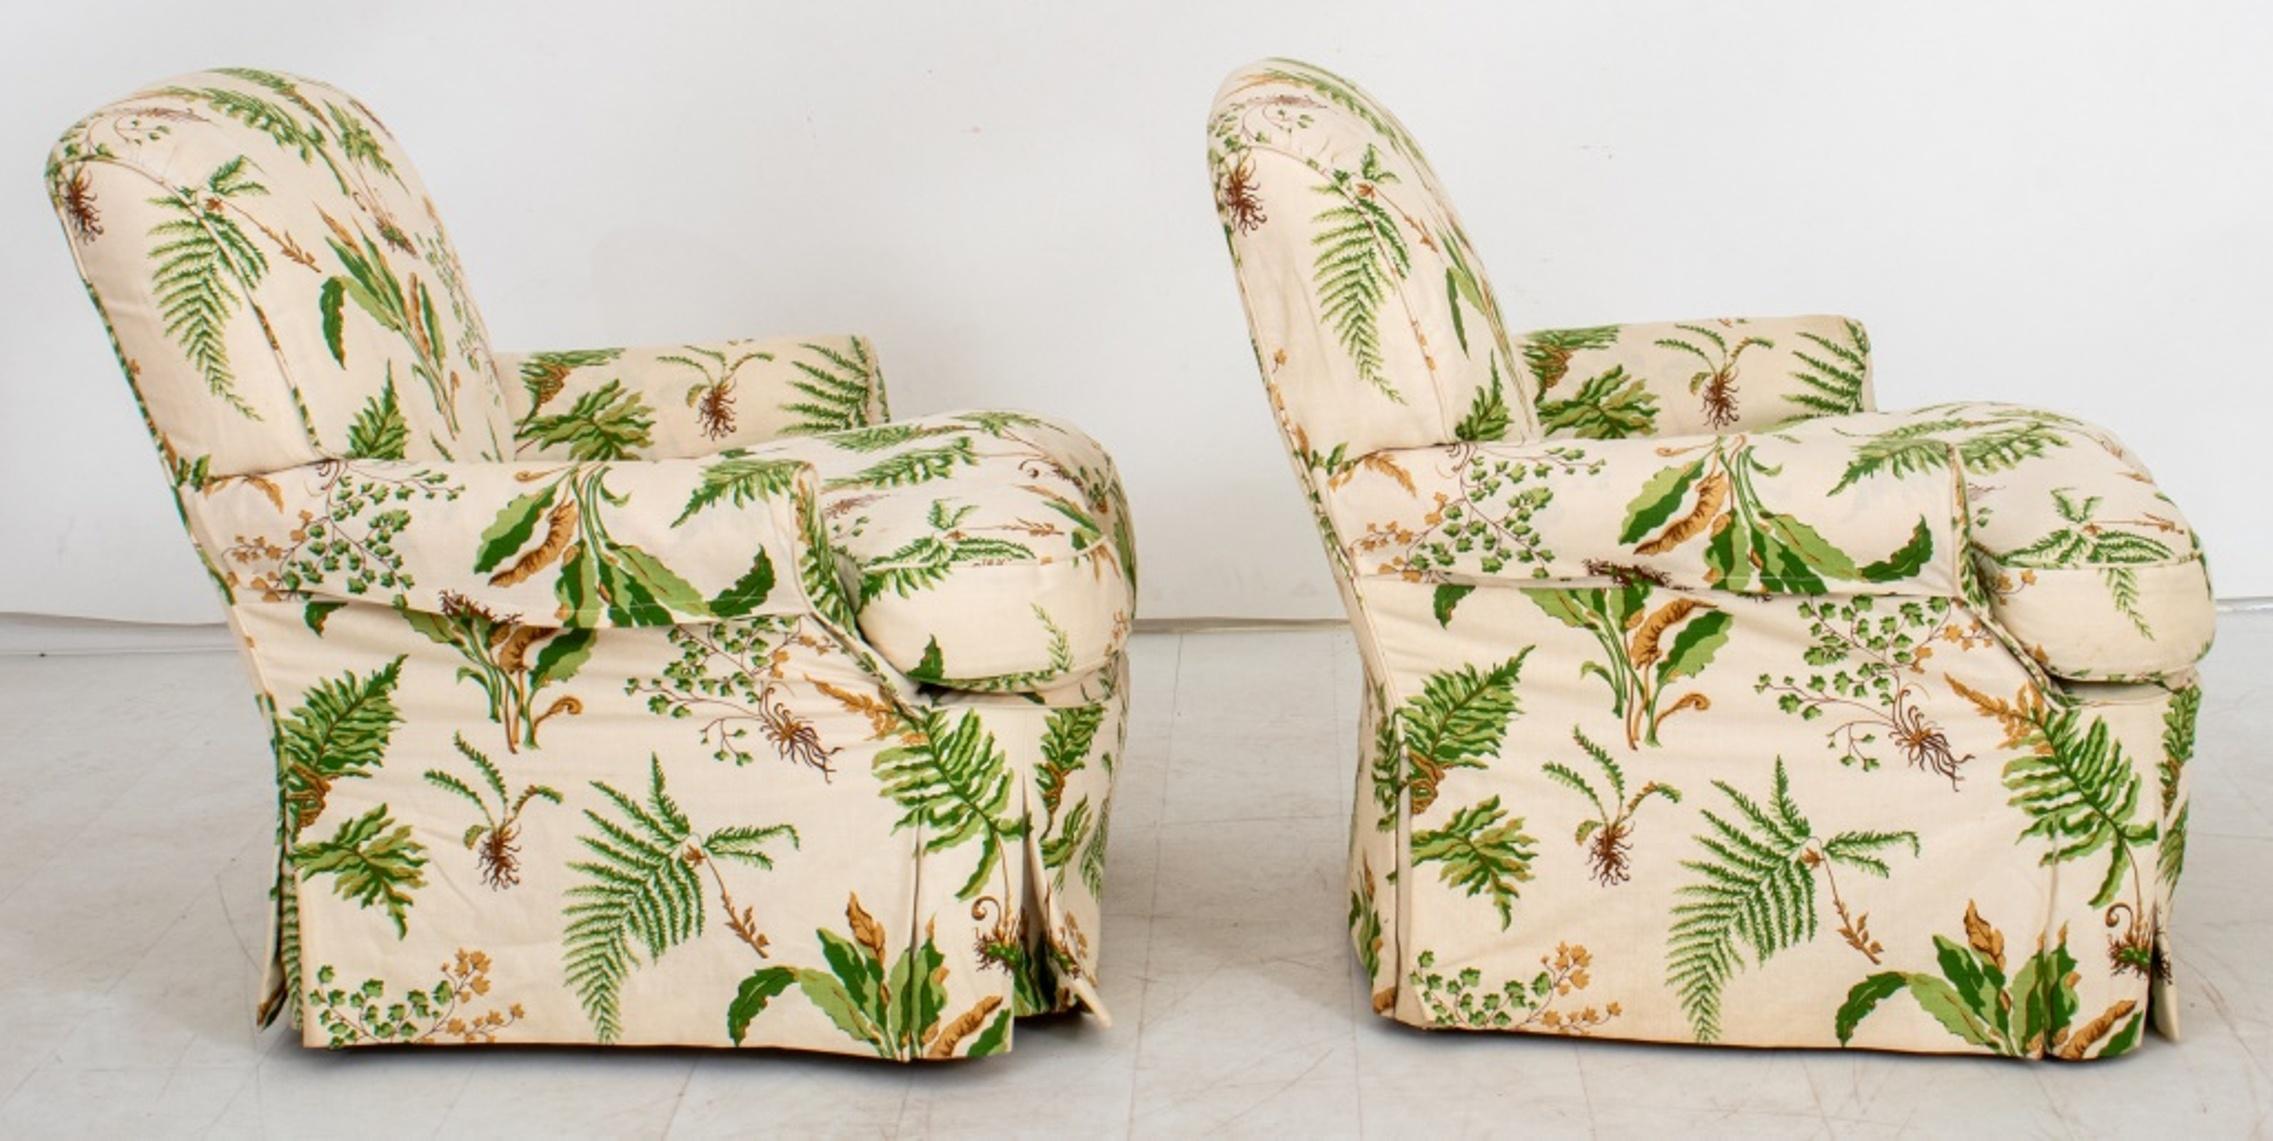 Contemporary Club Chairs, Elsie de Wolfe Botanical Slipcovers